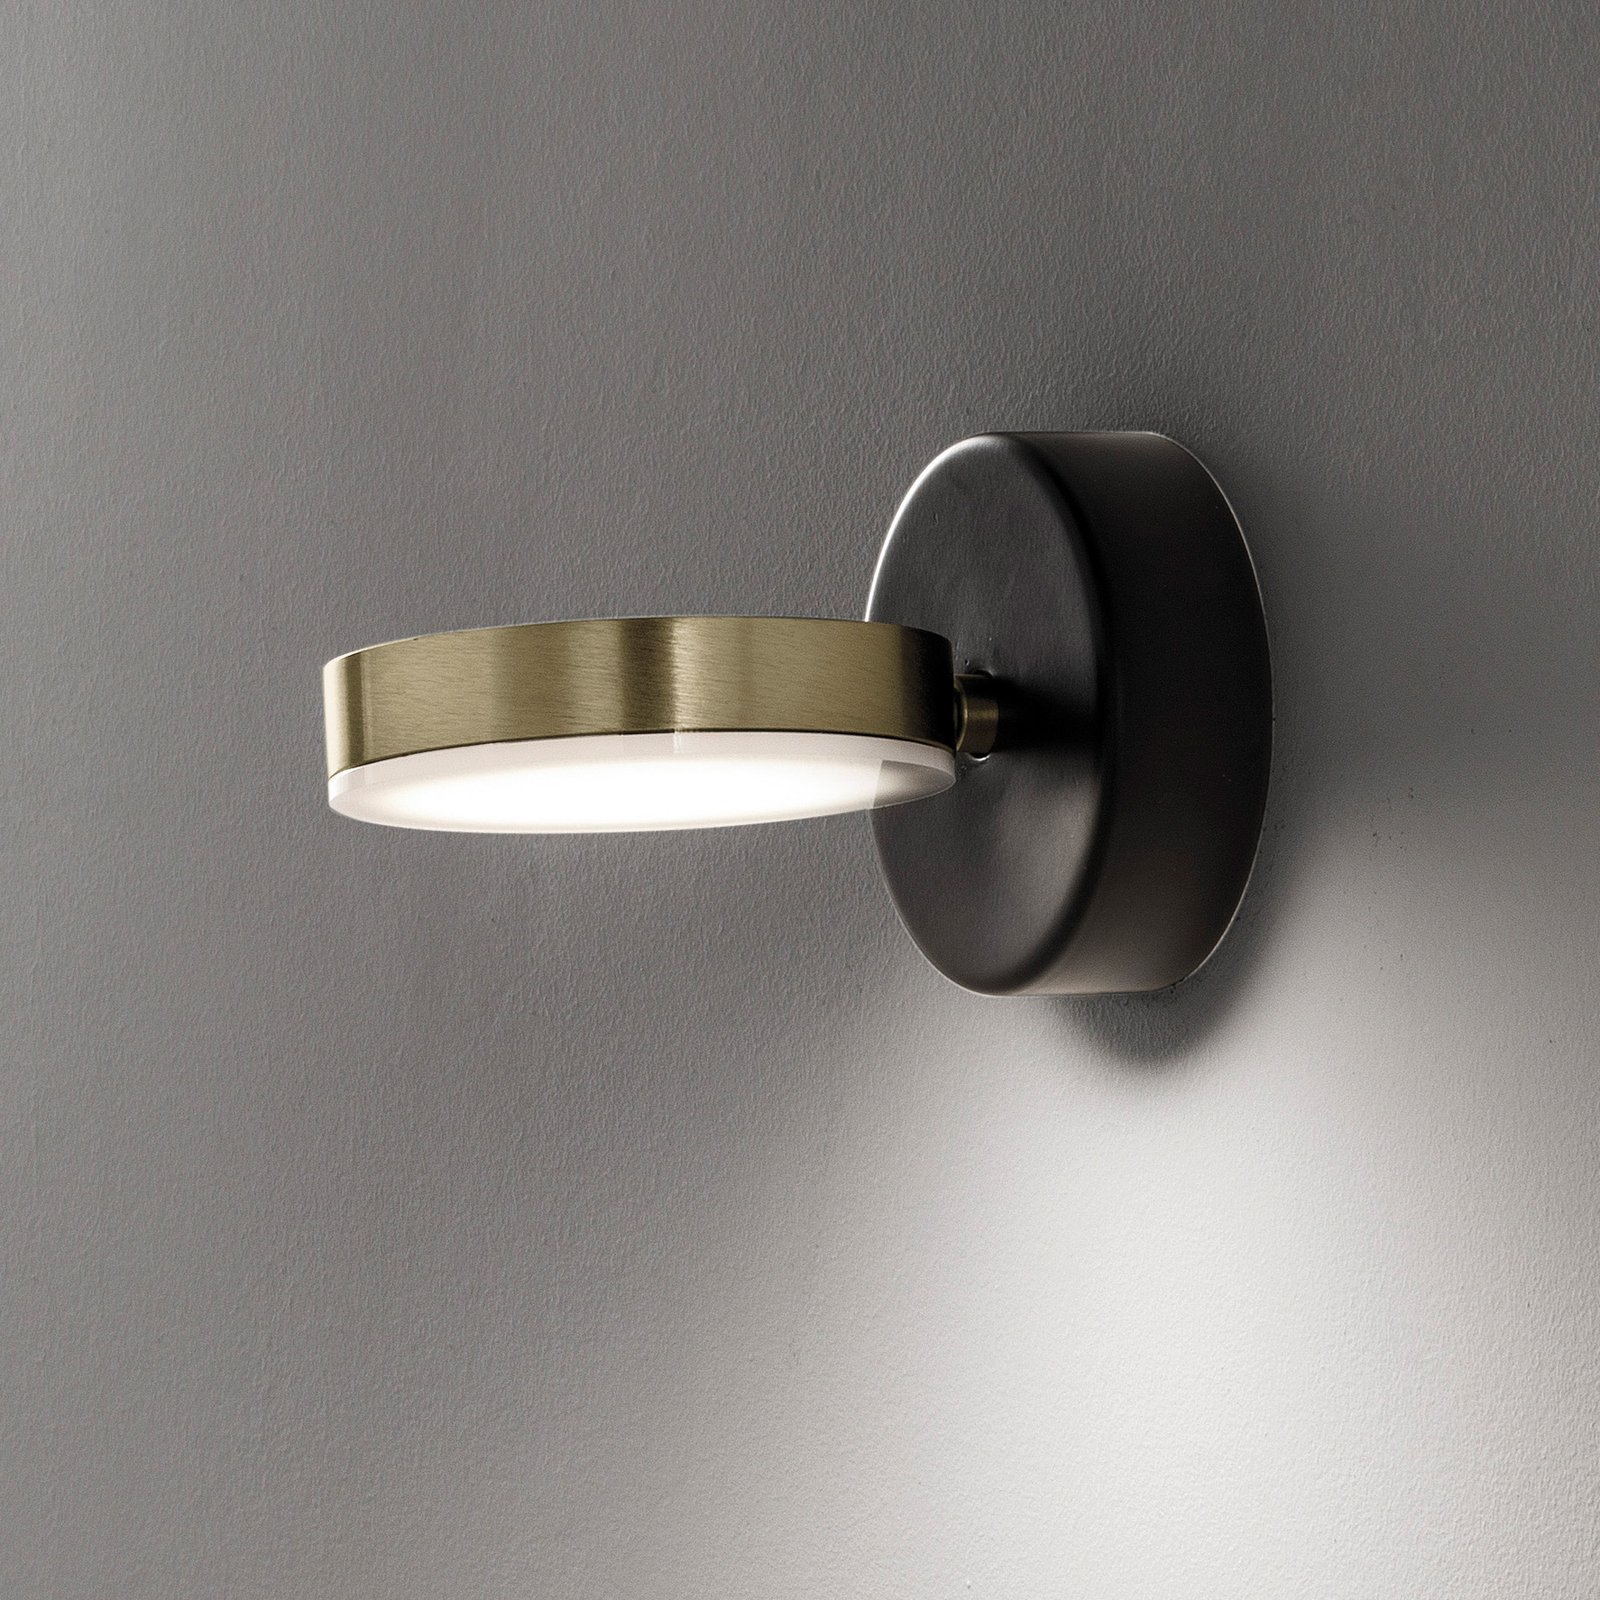 Giotto A LED wall spot pivotable and tiltable gold